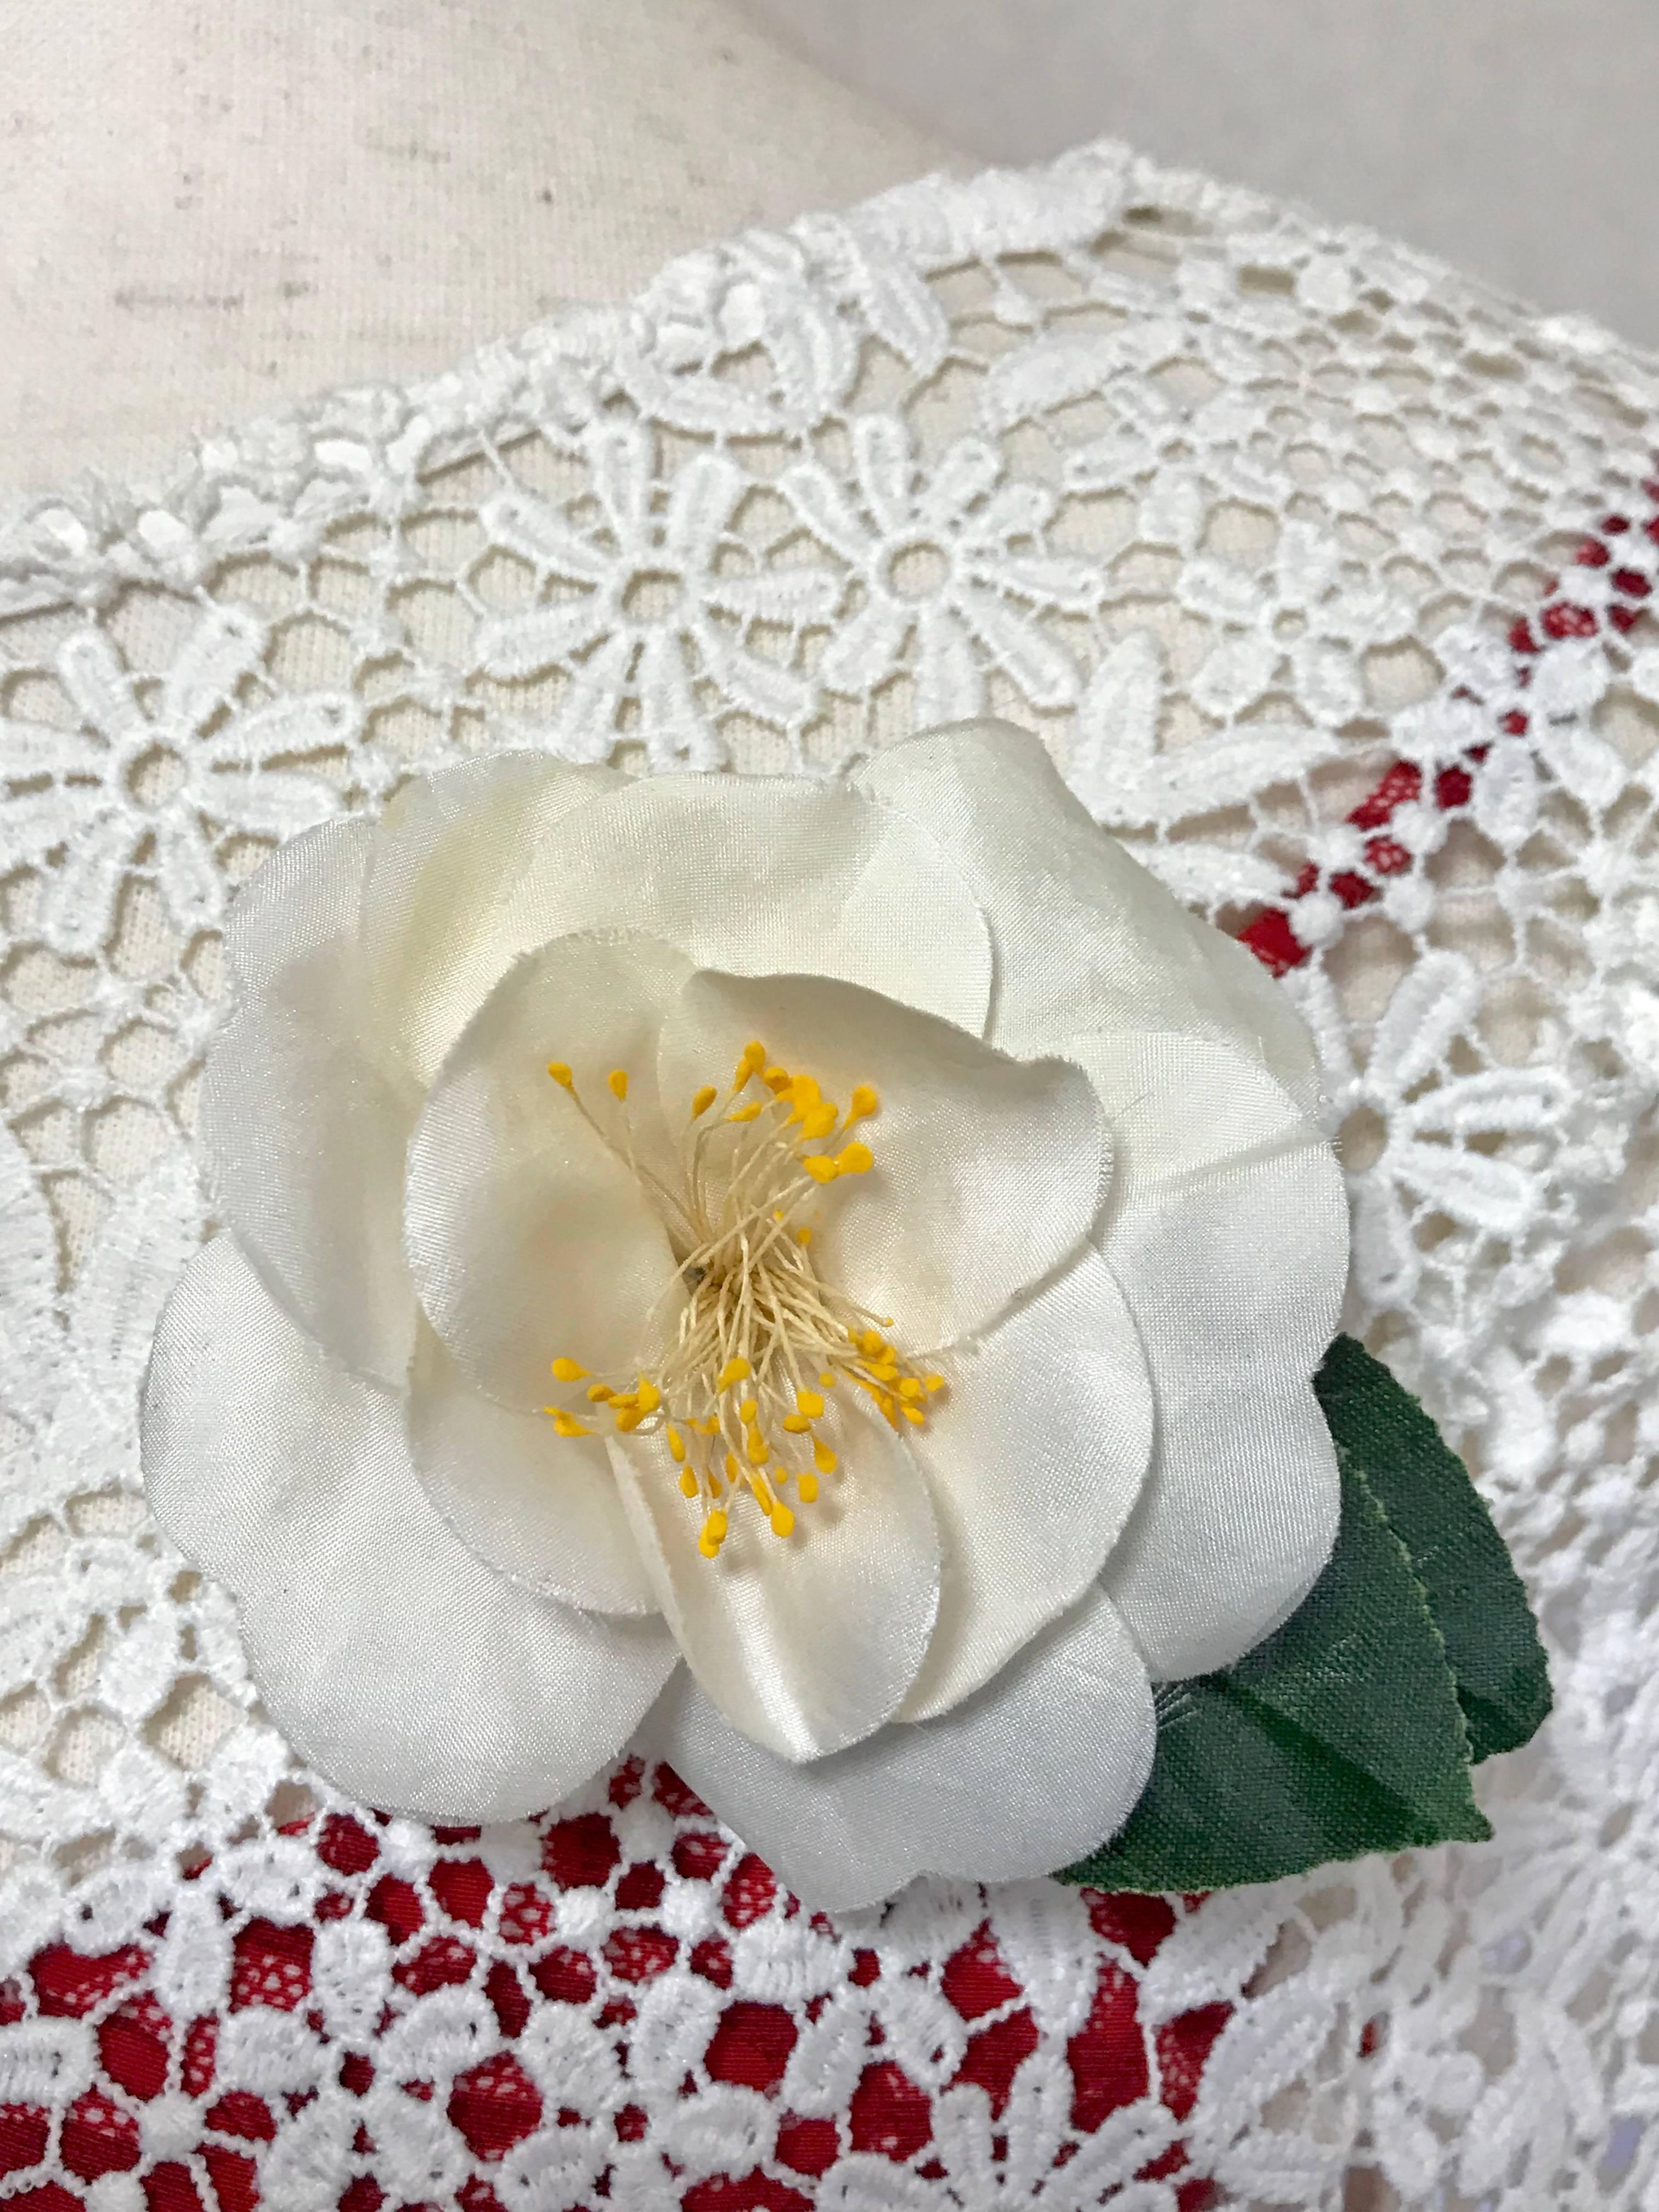 Vintage CHANEL ivory white silk camellia flower brooch with green leaves.  5